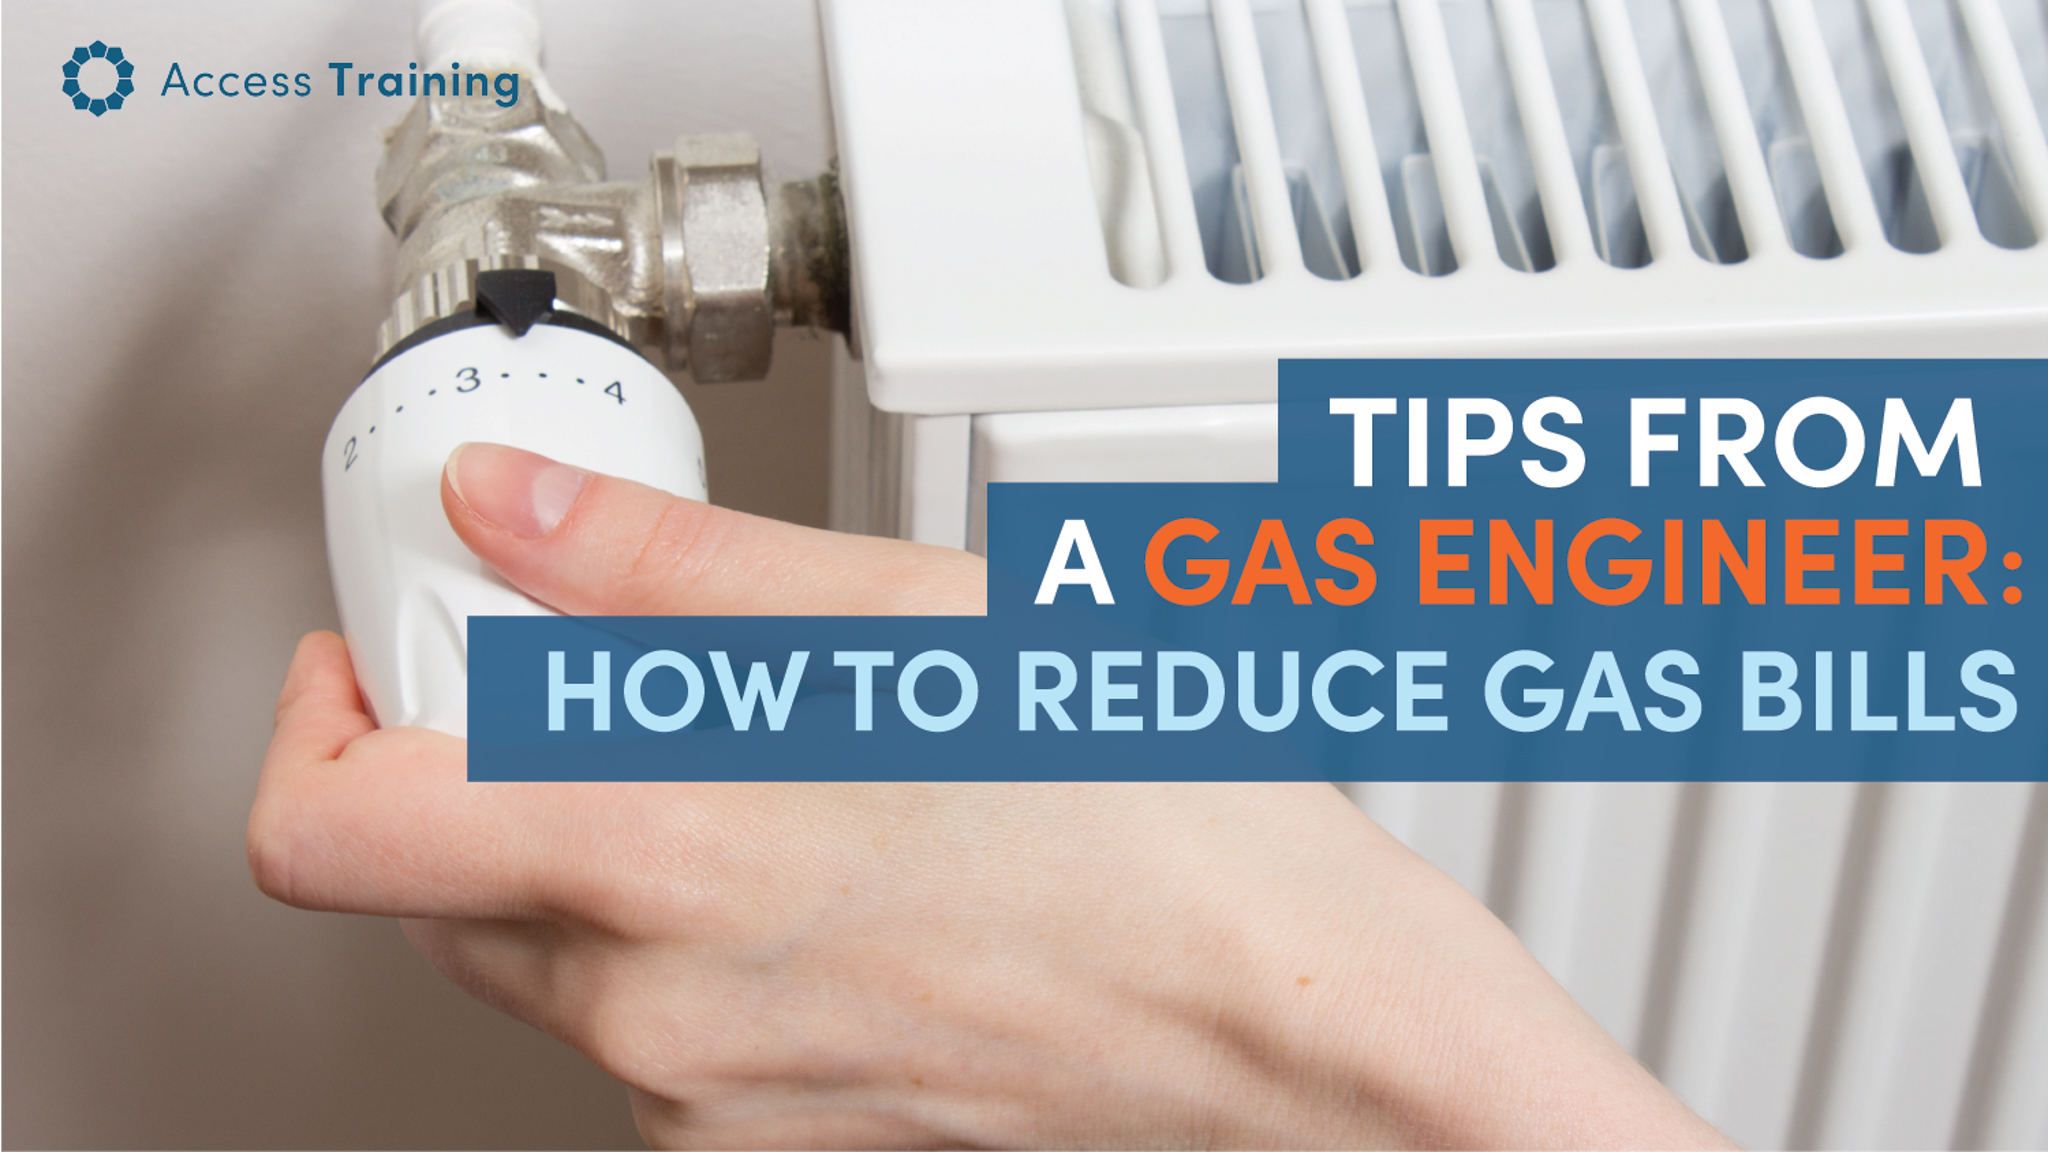 Tips from a Gas Engineer: How to Reduce Gas Bills